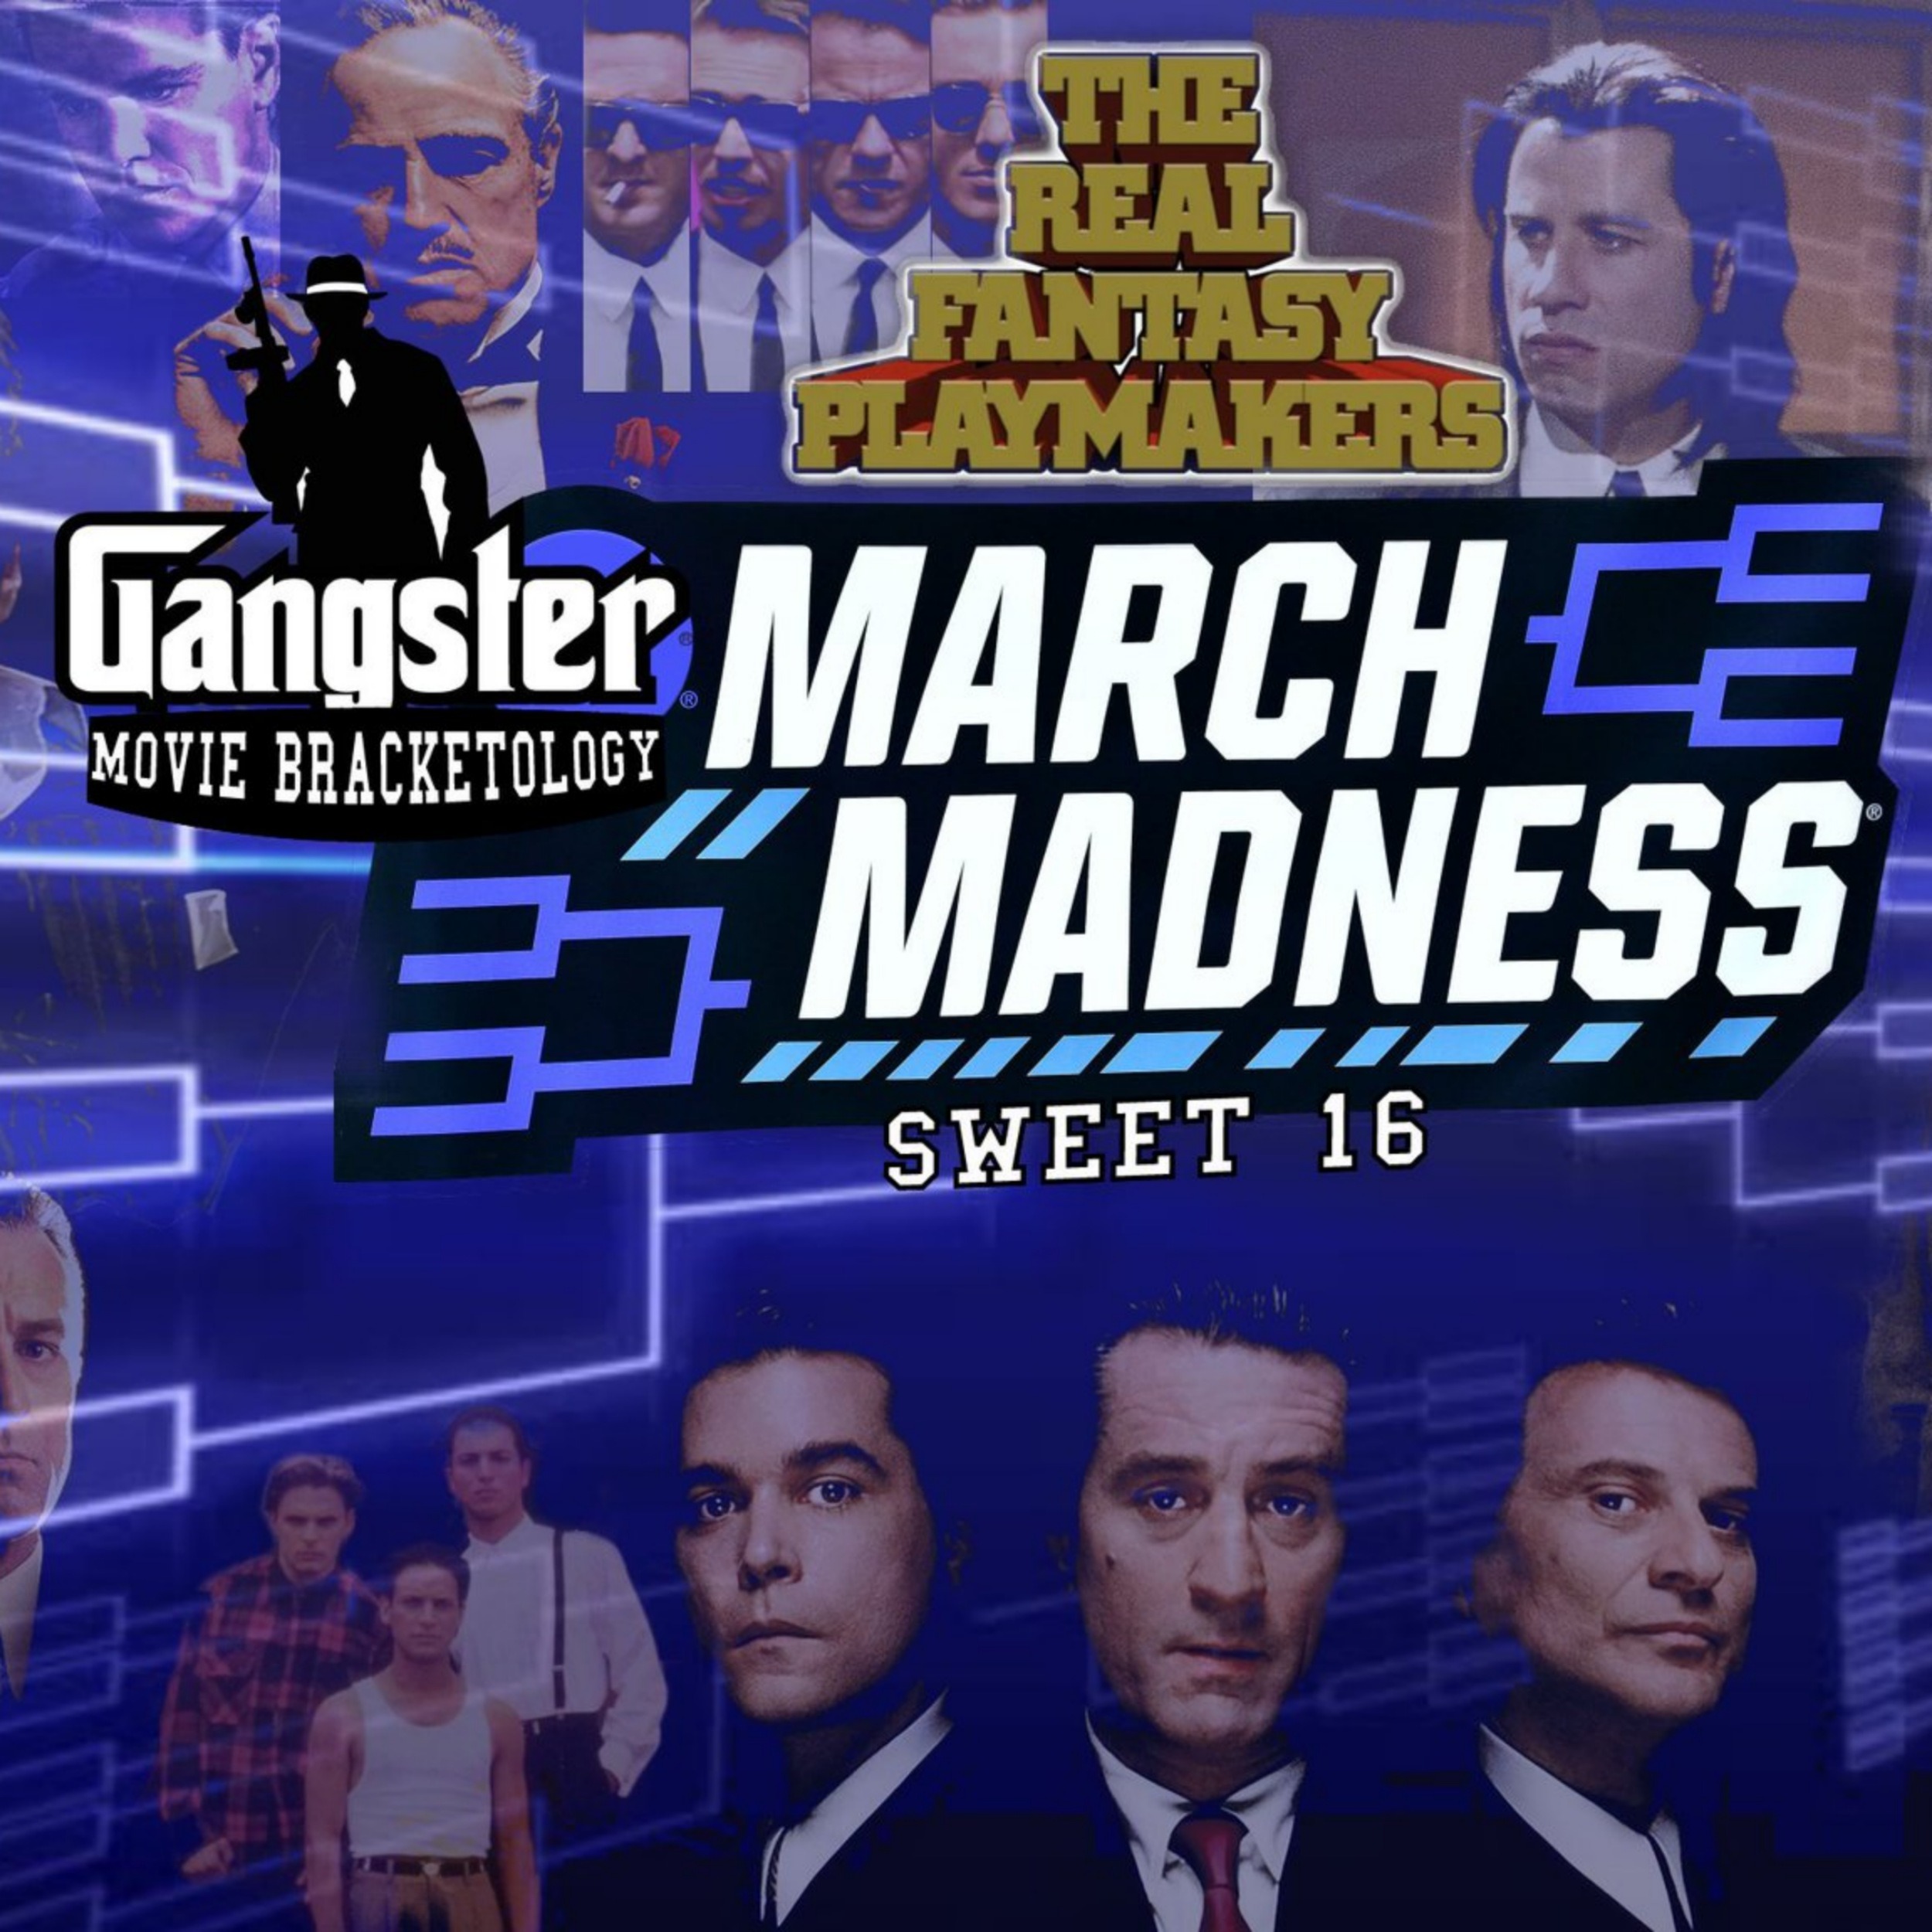 Gangster Movie Bracketology | March Madness Image